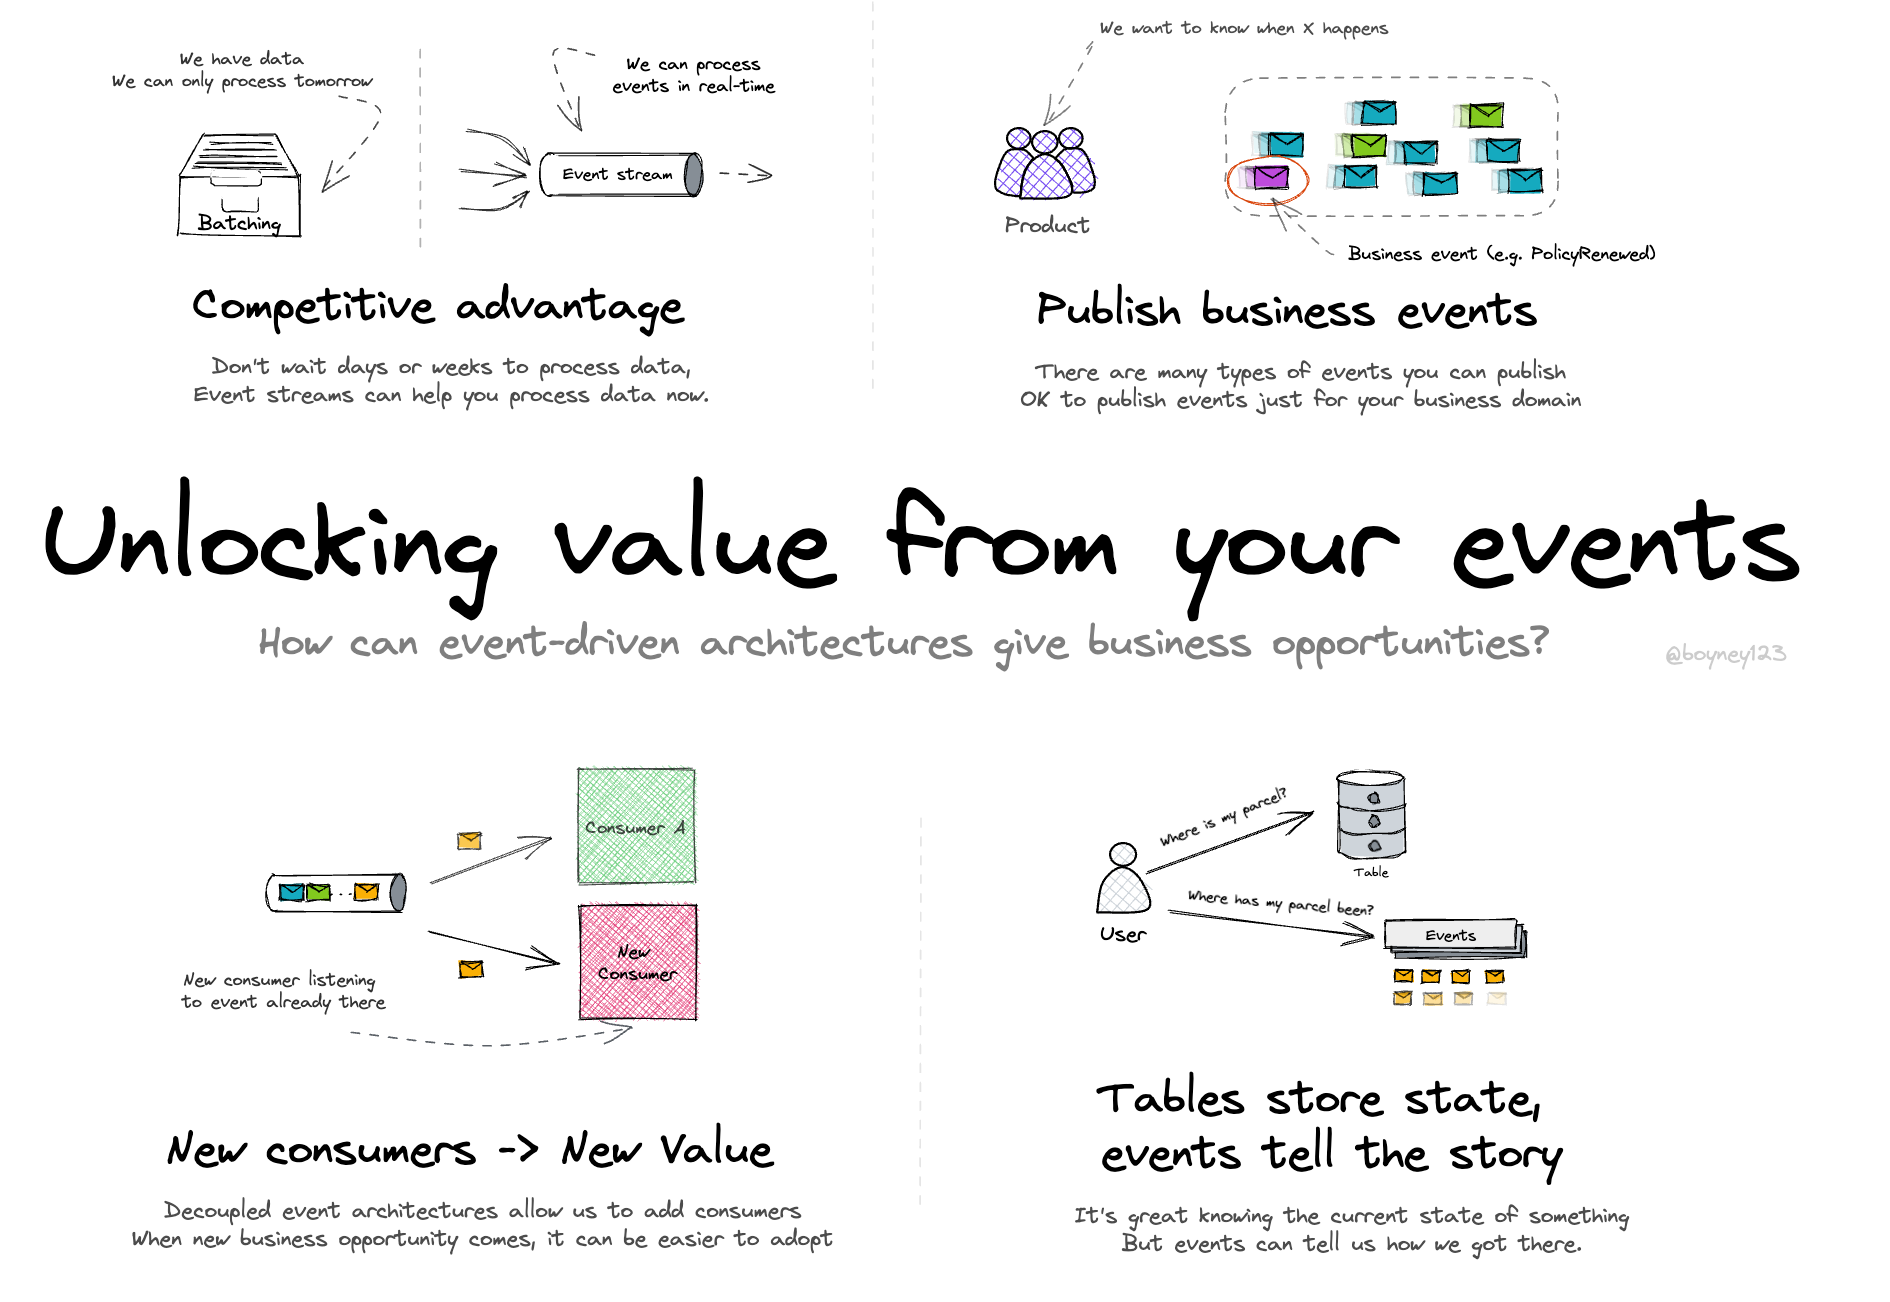 Unlocking value from your events